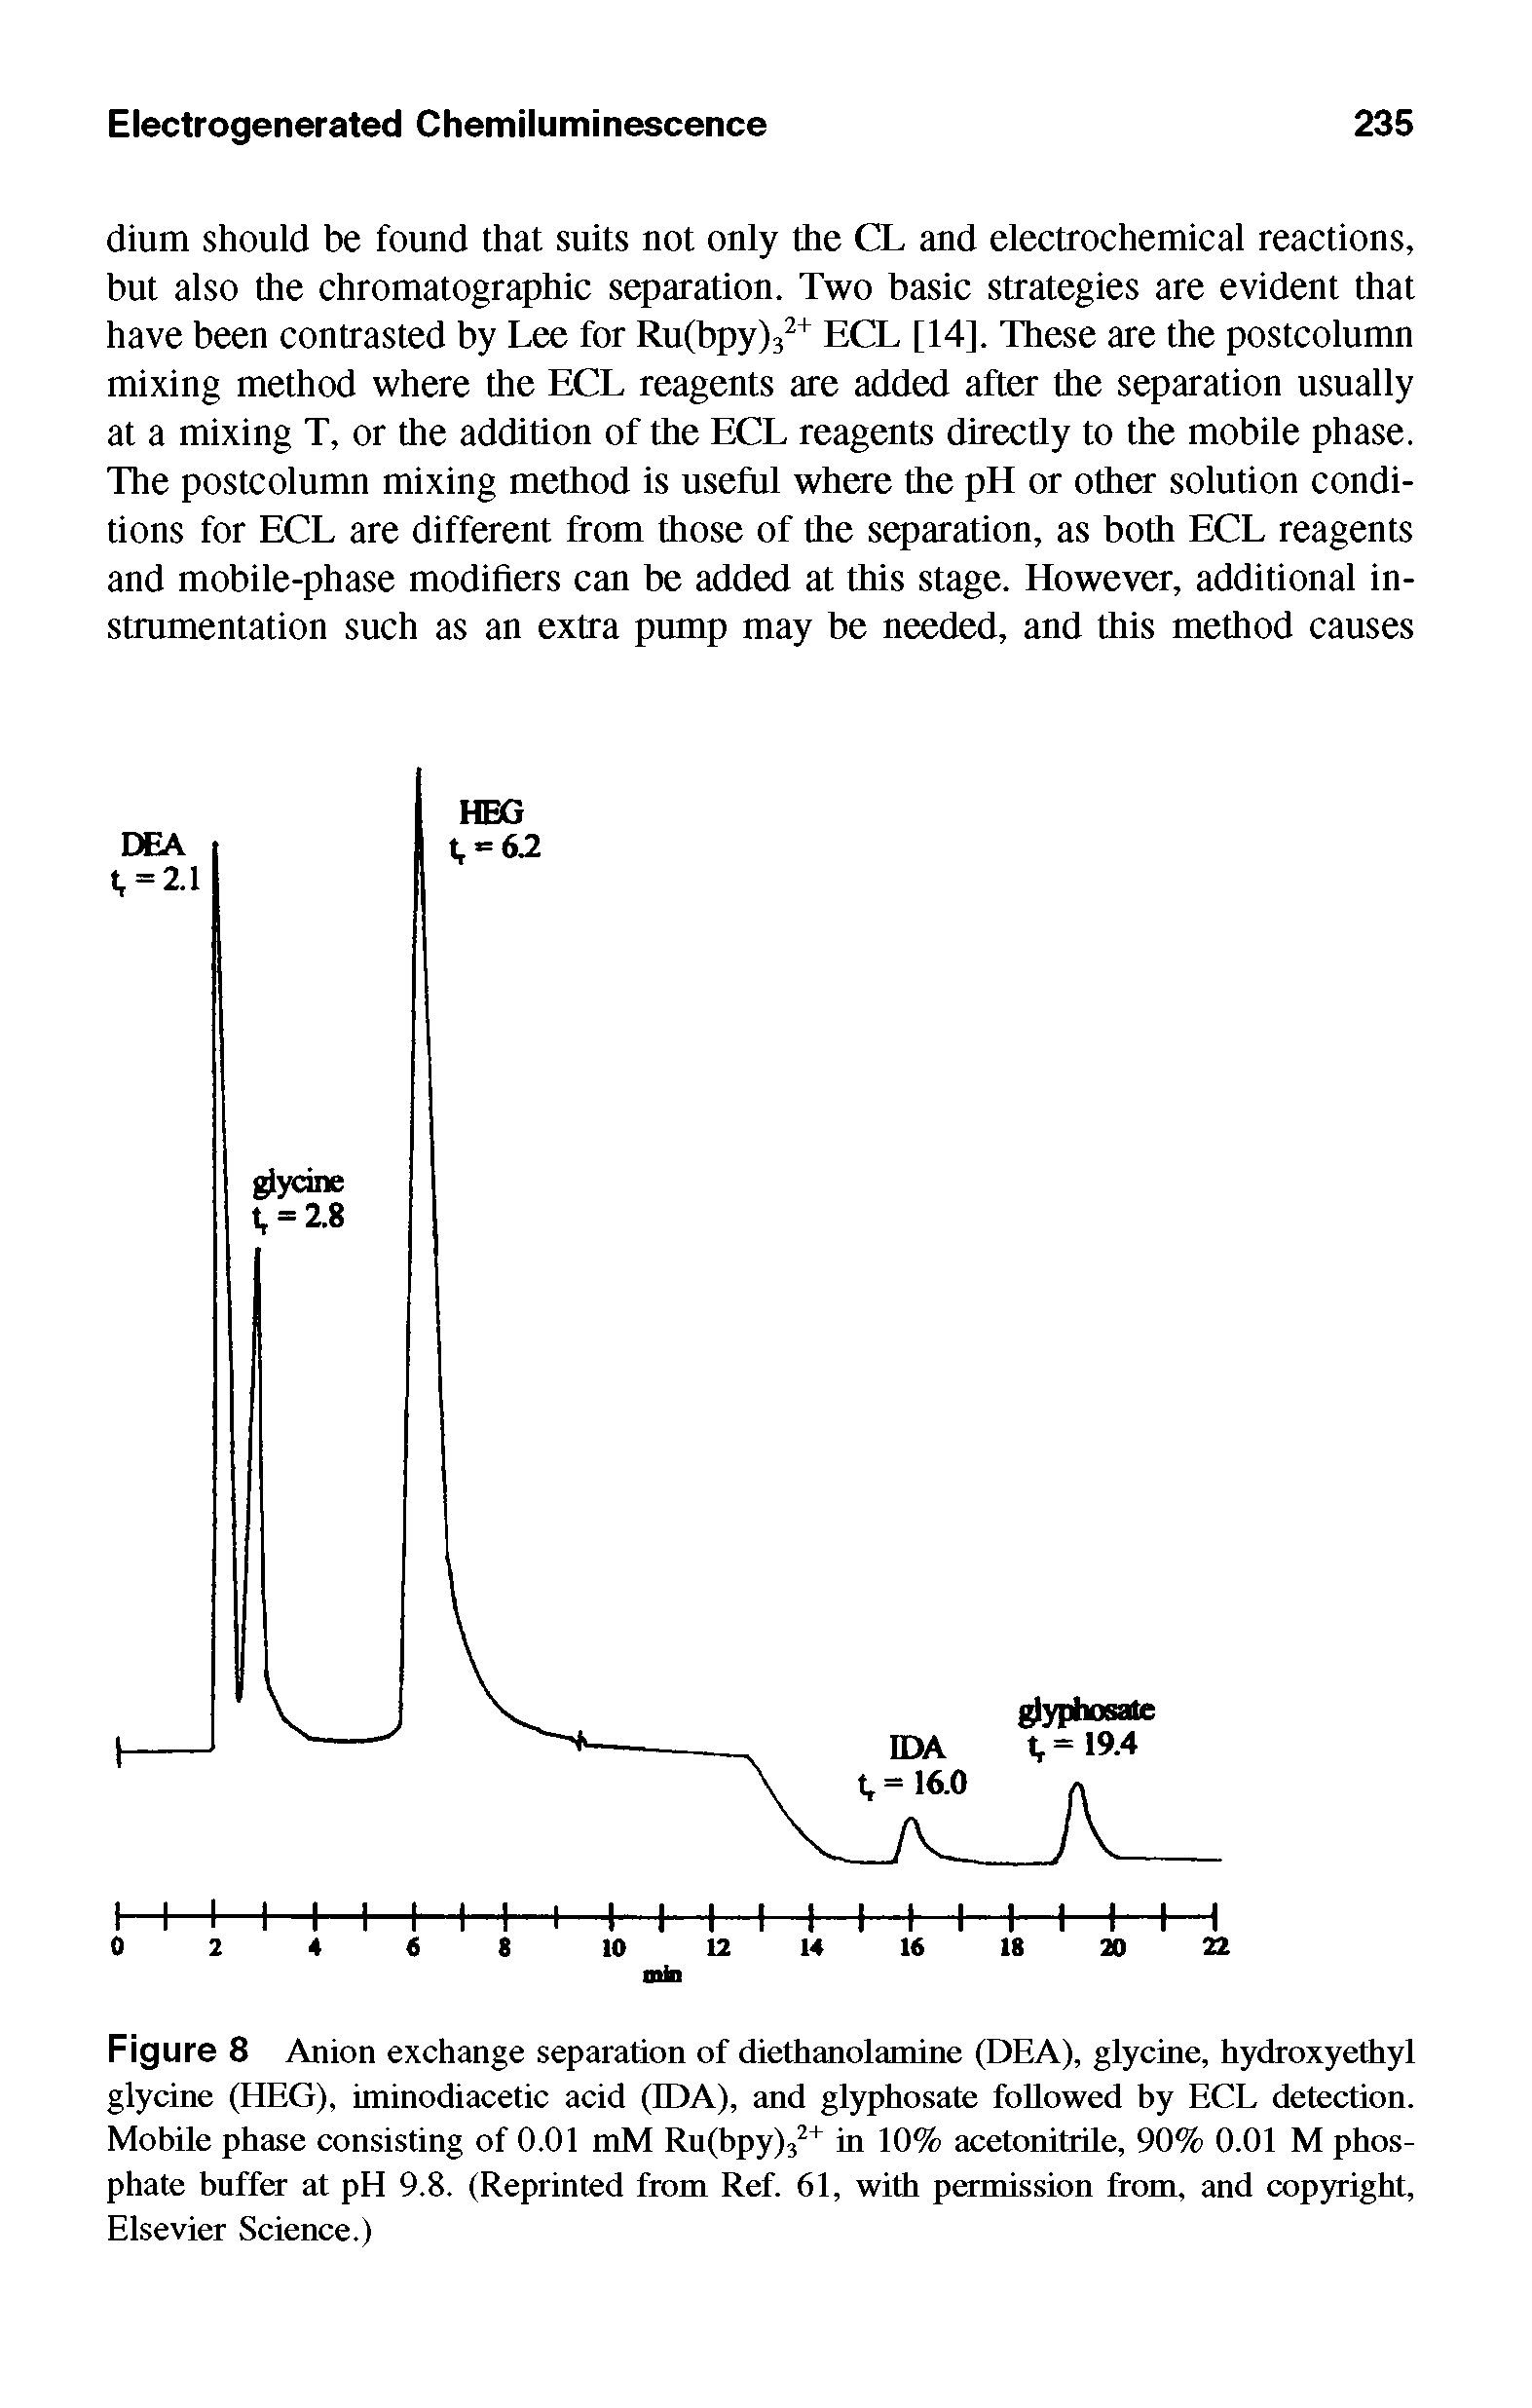 Figure 8 Anion exchange separation of diethanolamine (DEA), glycine, hydroxyethyl glycine (HEG), iminodiacetic acid (IDA), and glyphosate followed by ECL detection. Mobile phase consisting of 0.01 mM Ru(bpy)32+ in 10% acetonitrile, 90% 0.01 M phosphate buffer at pH 9.8. (Reprinted from Ref. 61, with permission from, and copyright, Elsevier Science.)...